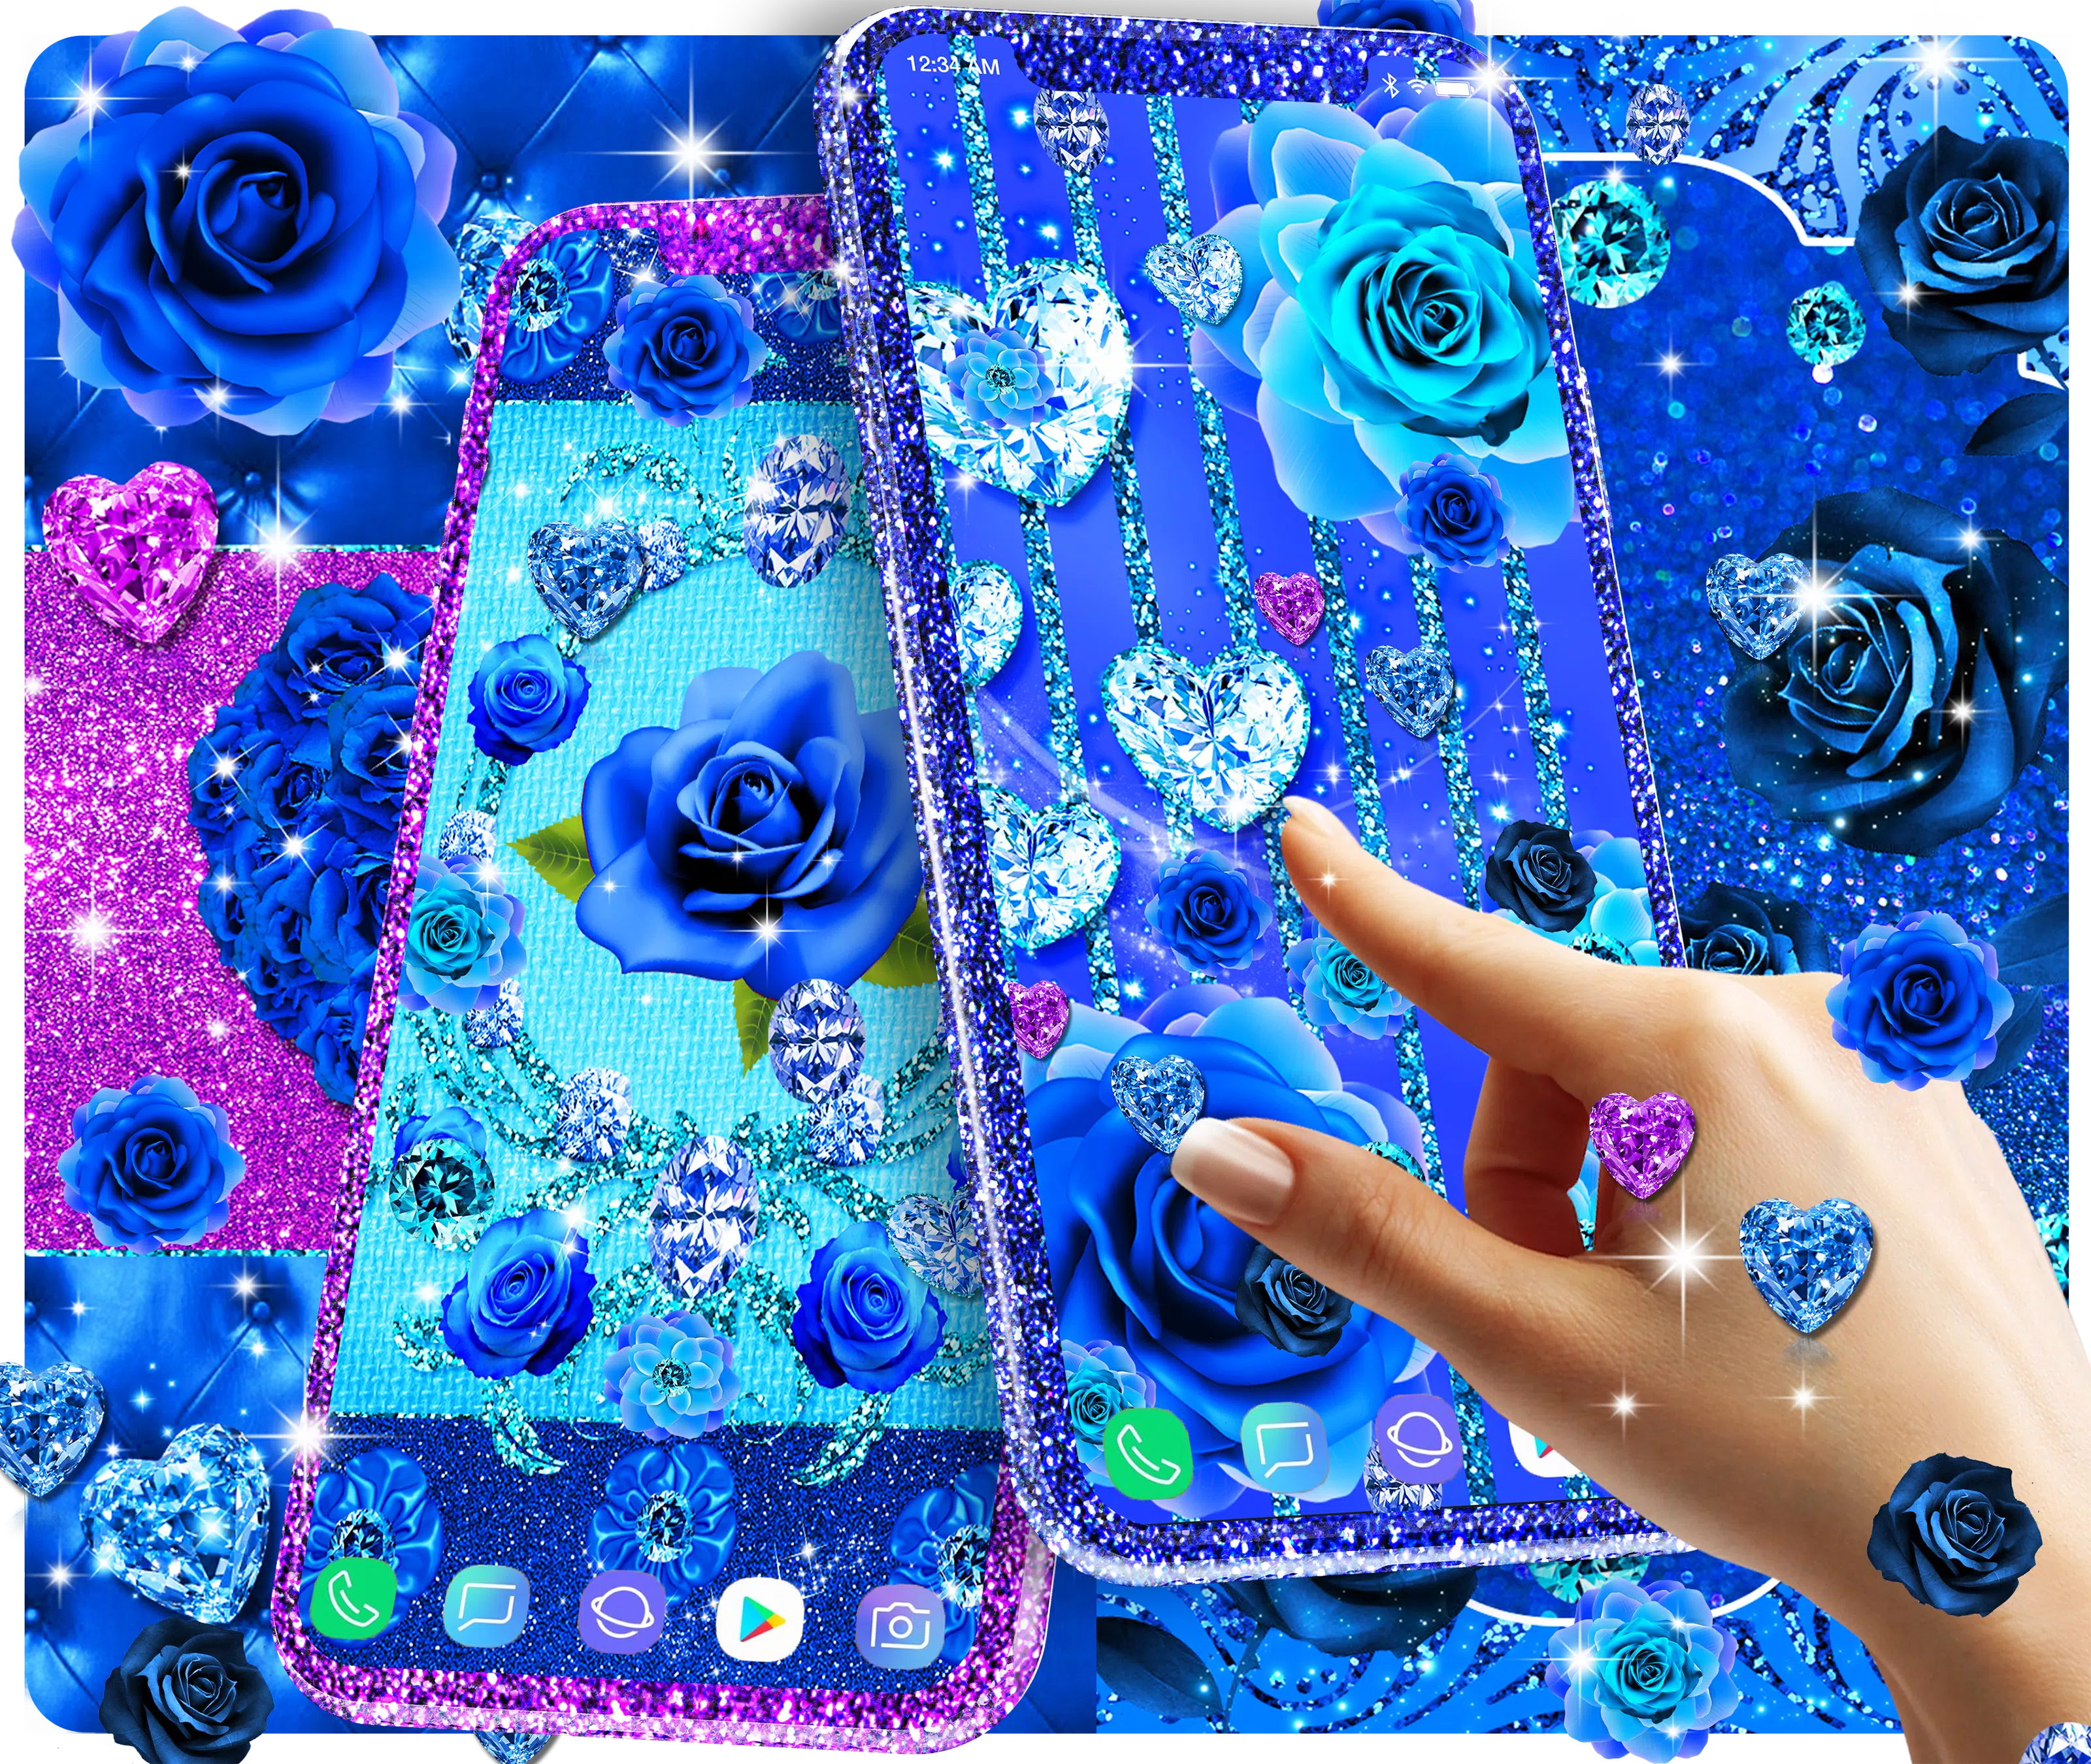 Blue diamonds live wallpapers for Android - APK Download